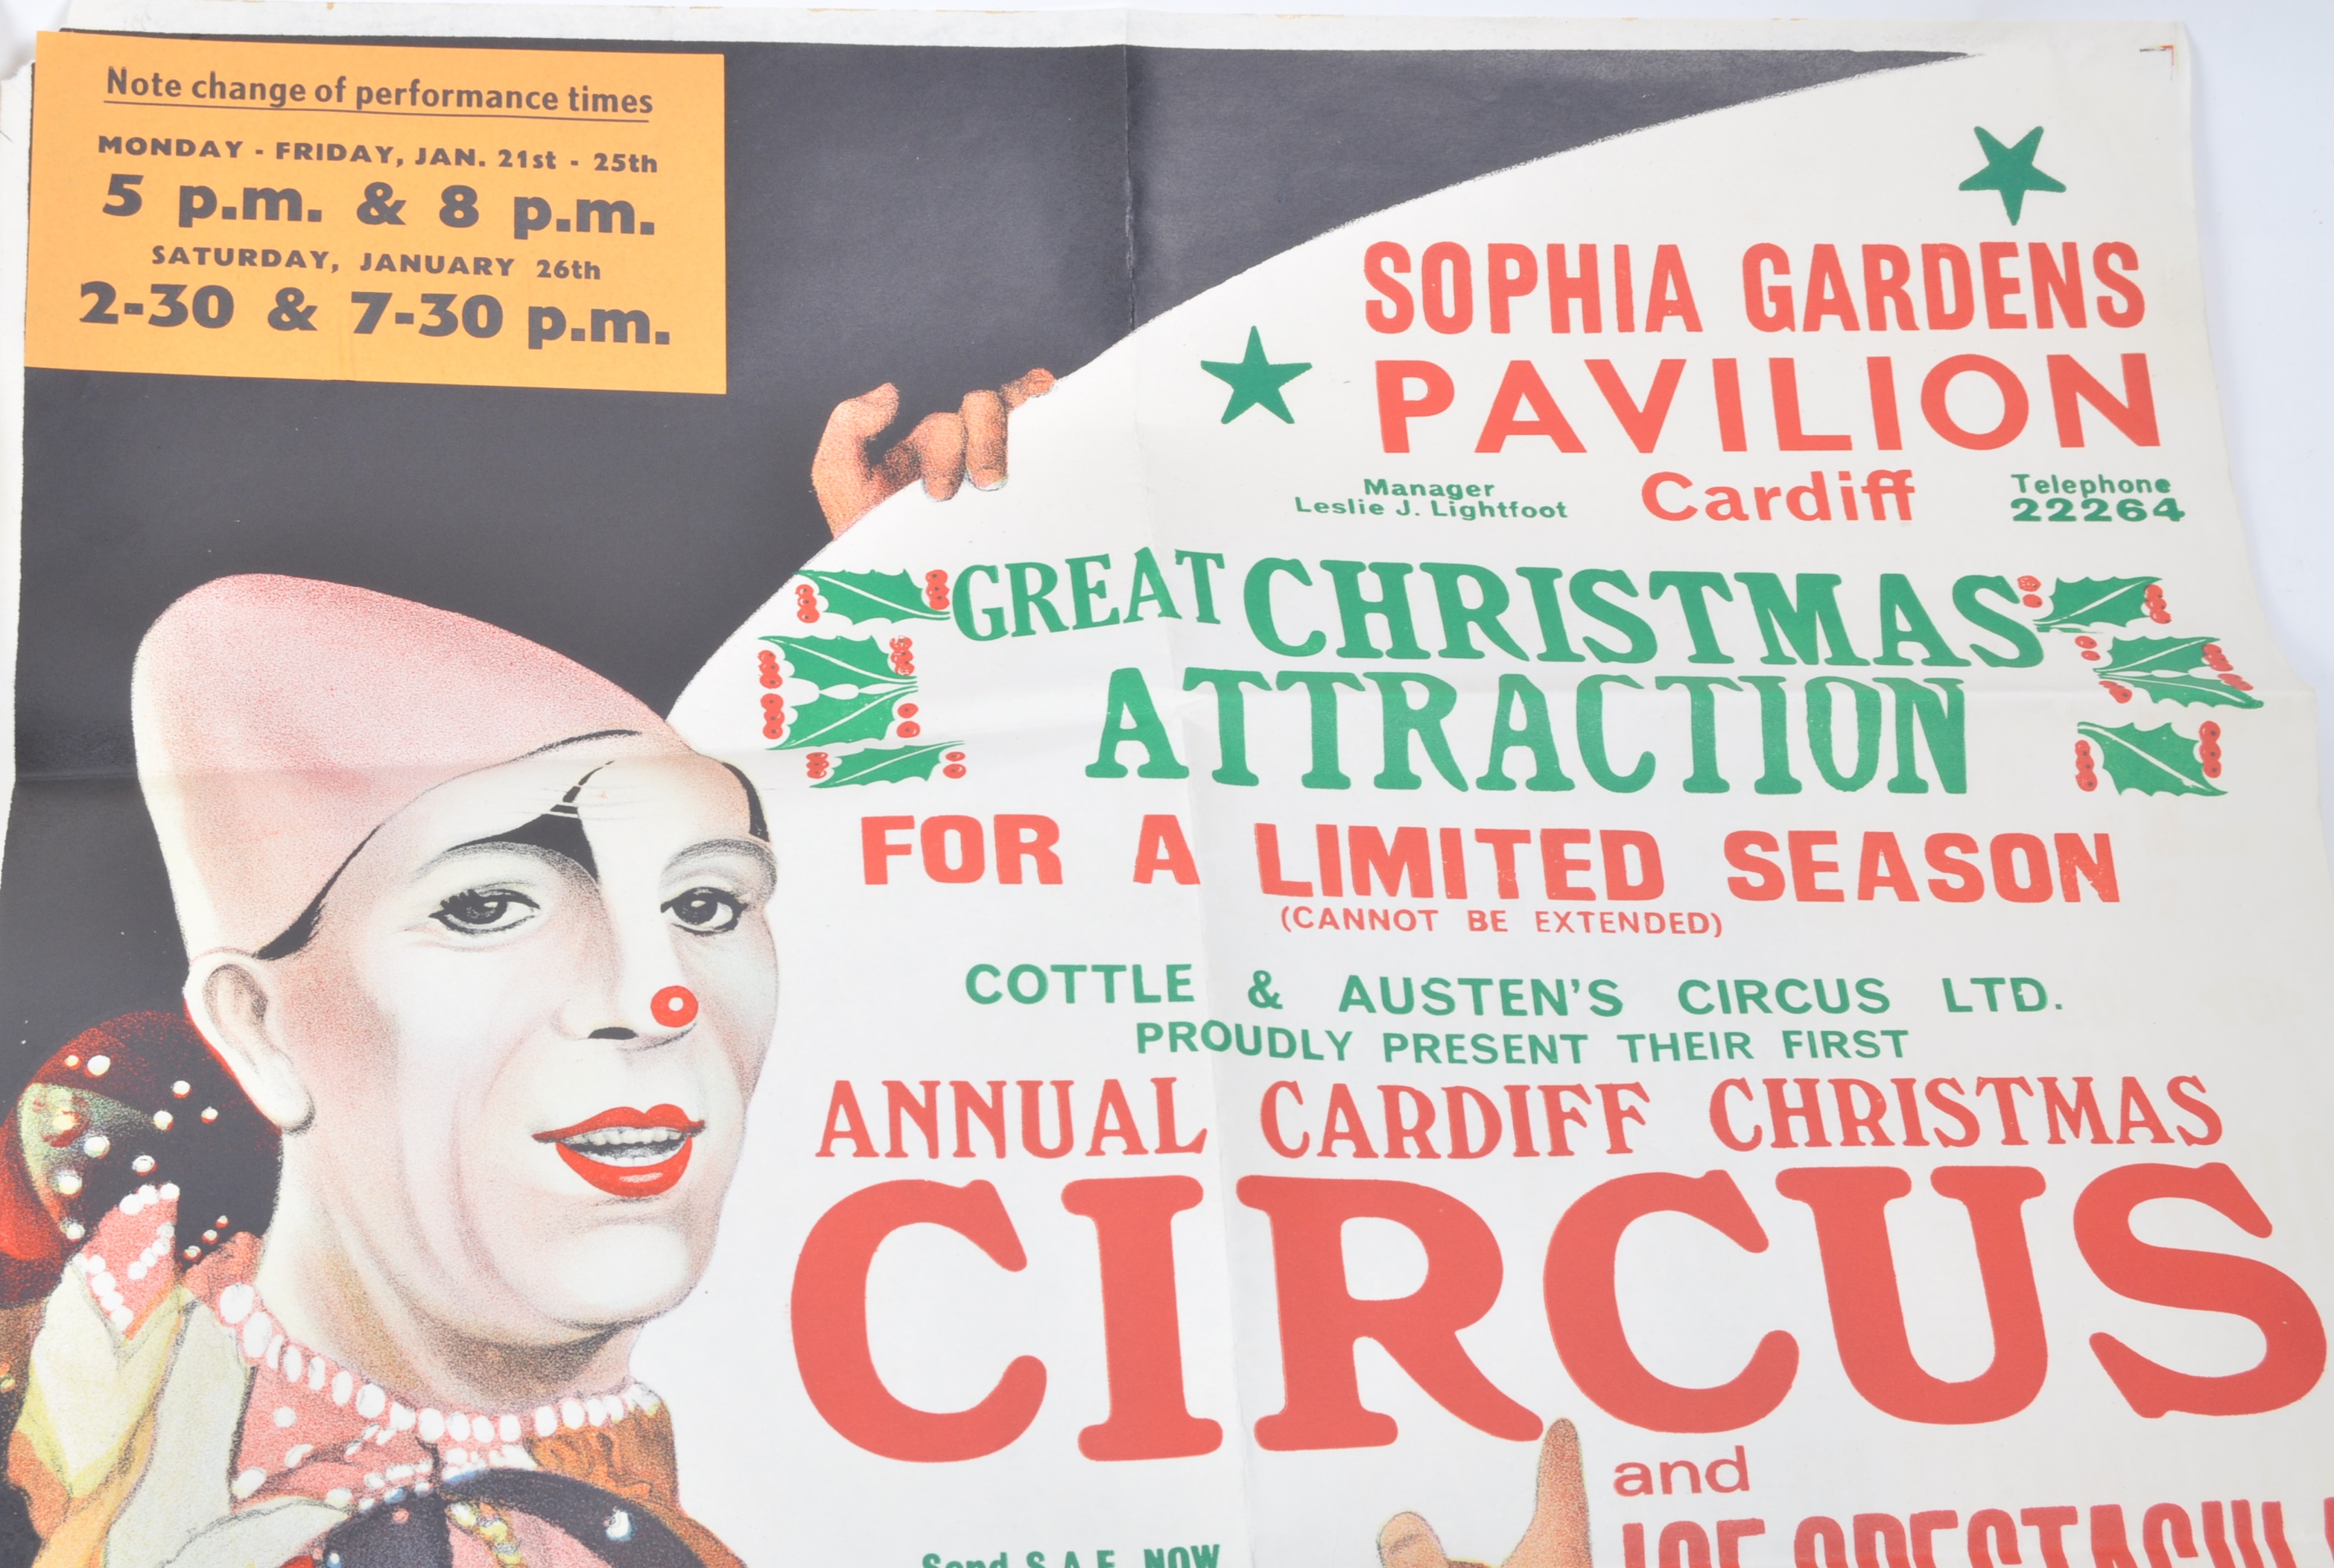 COTTLE & AUSTEN'S CIRCUS - VINTAGE ADVERTISING POSTERS - Image 4 of 4